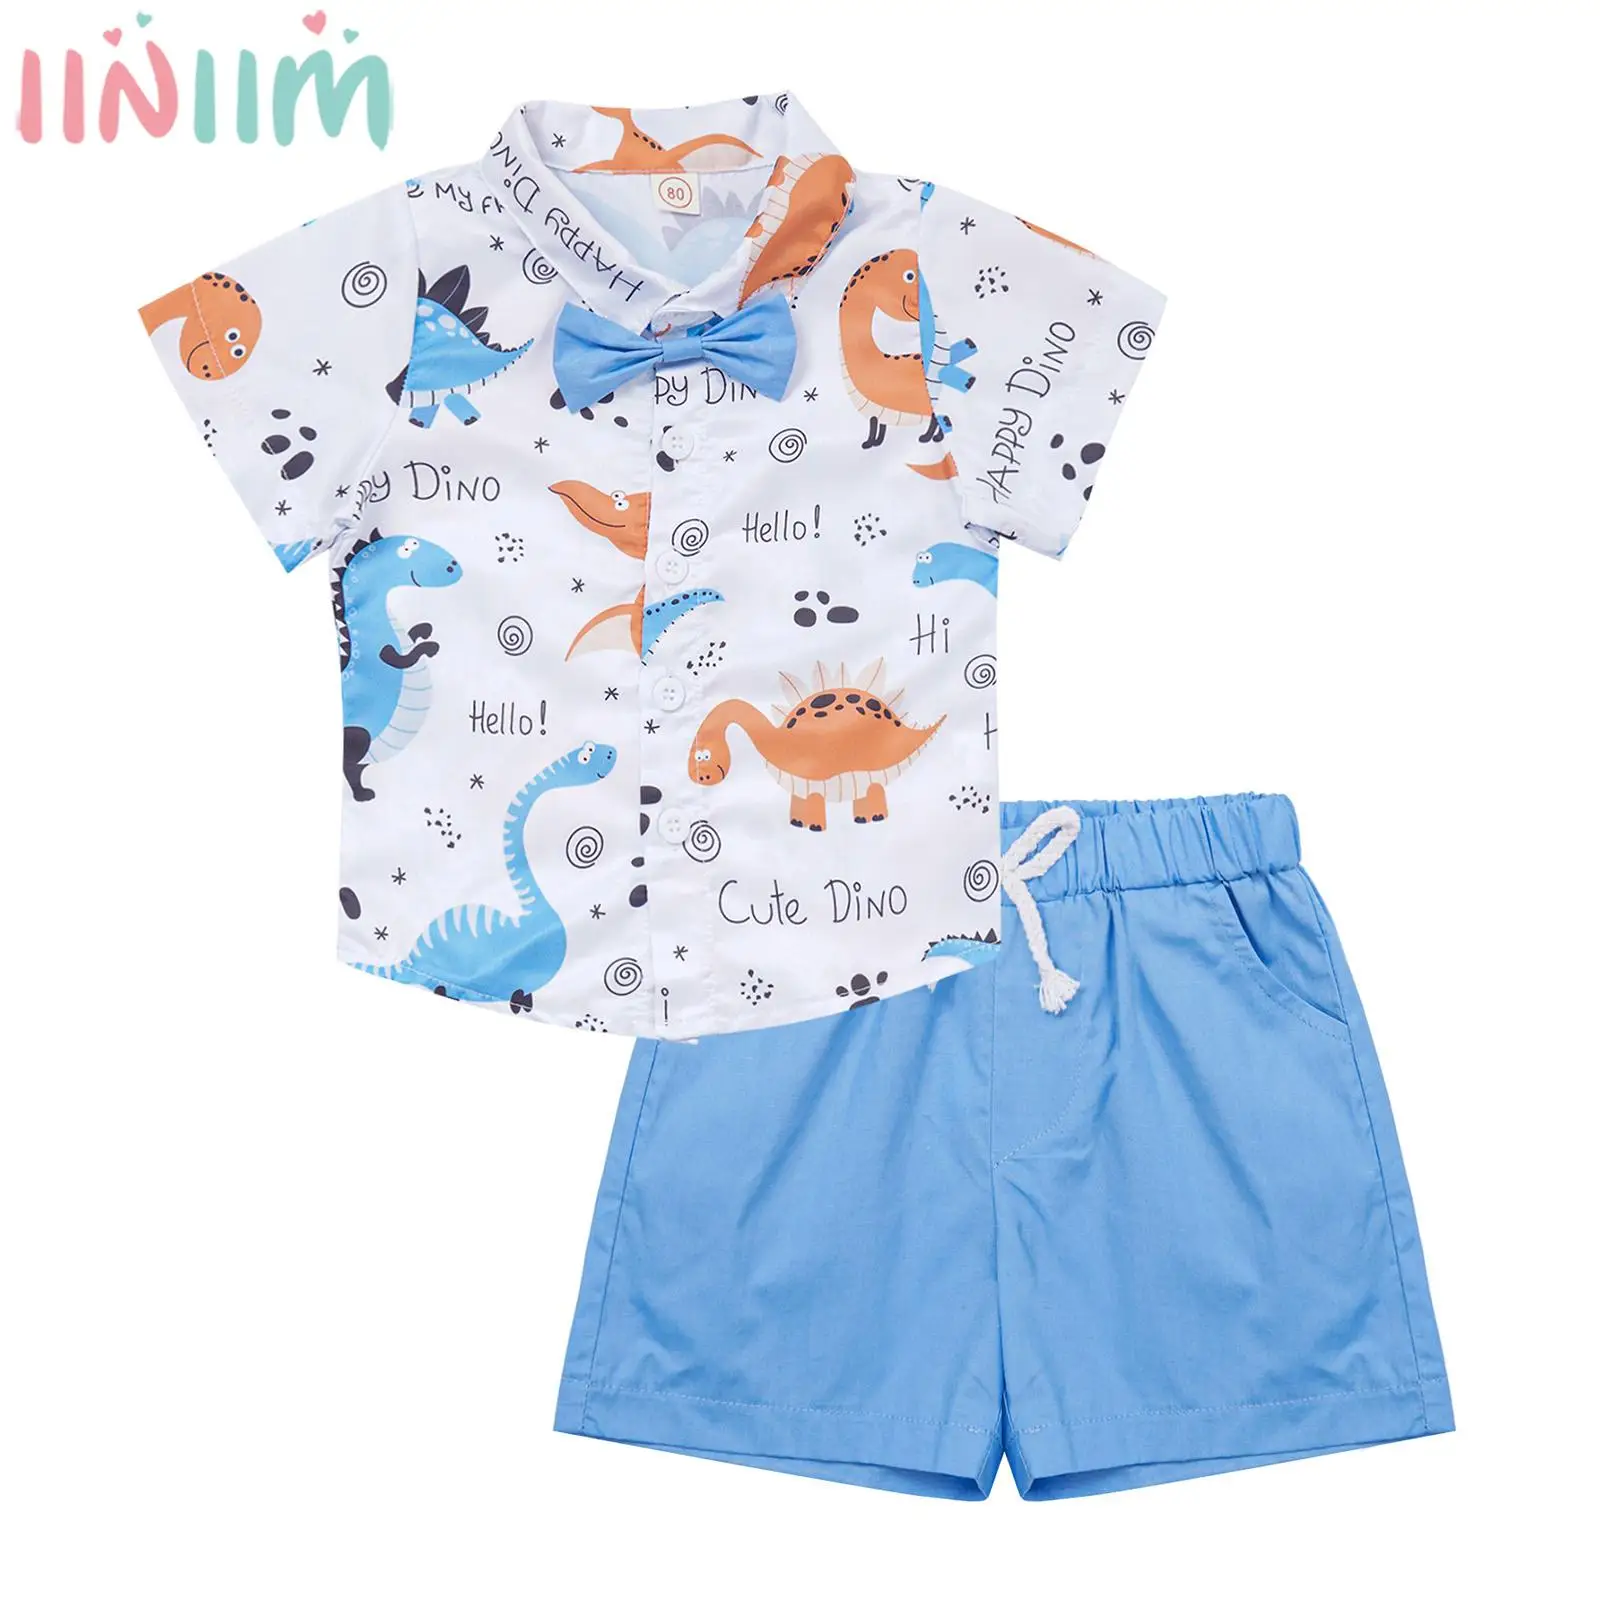 

Baby Boy Preppy Style Clothes Set Short Sleeve Bow Tie Cute Cartoon Print Lapel T-shirt with Shorts for Baptism Party Daily Wear